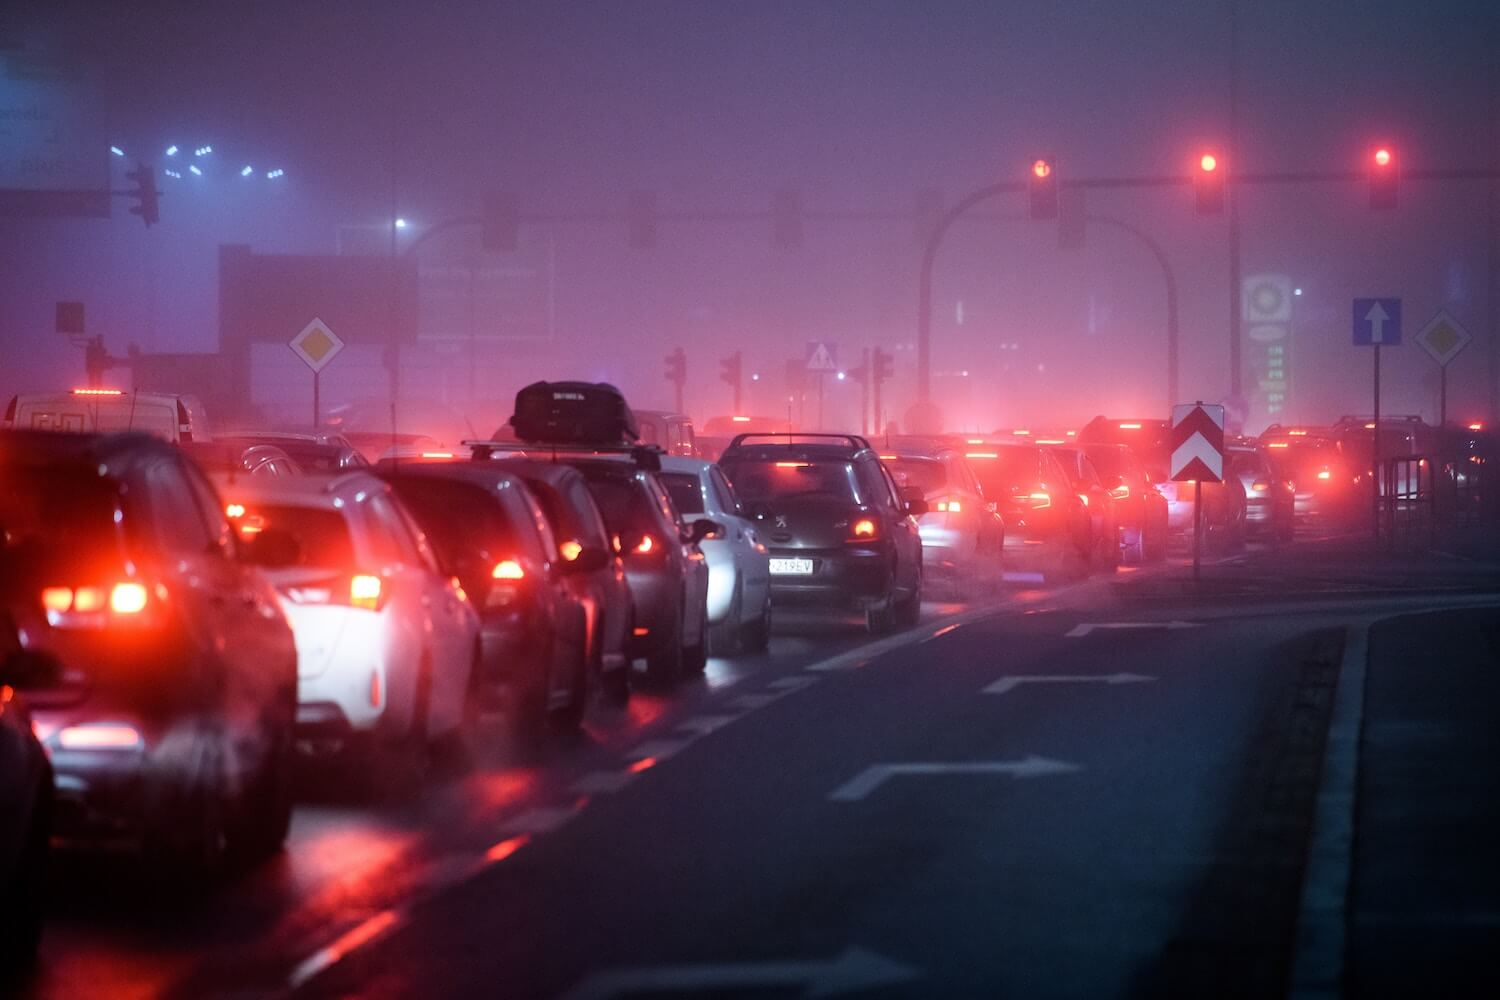 Bumper-to-bumper traffic waits on the interstate, tail lights illuminating the fog.